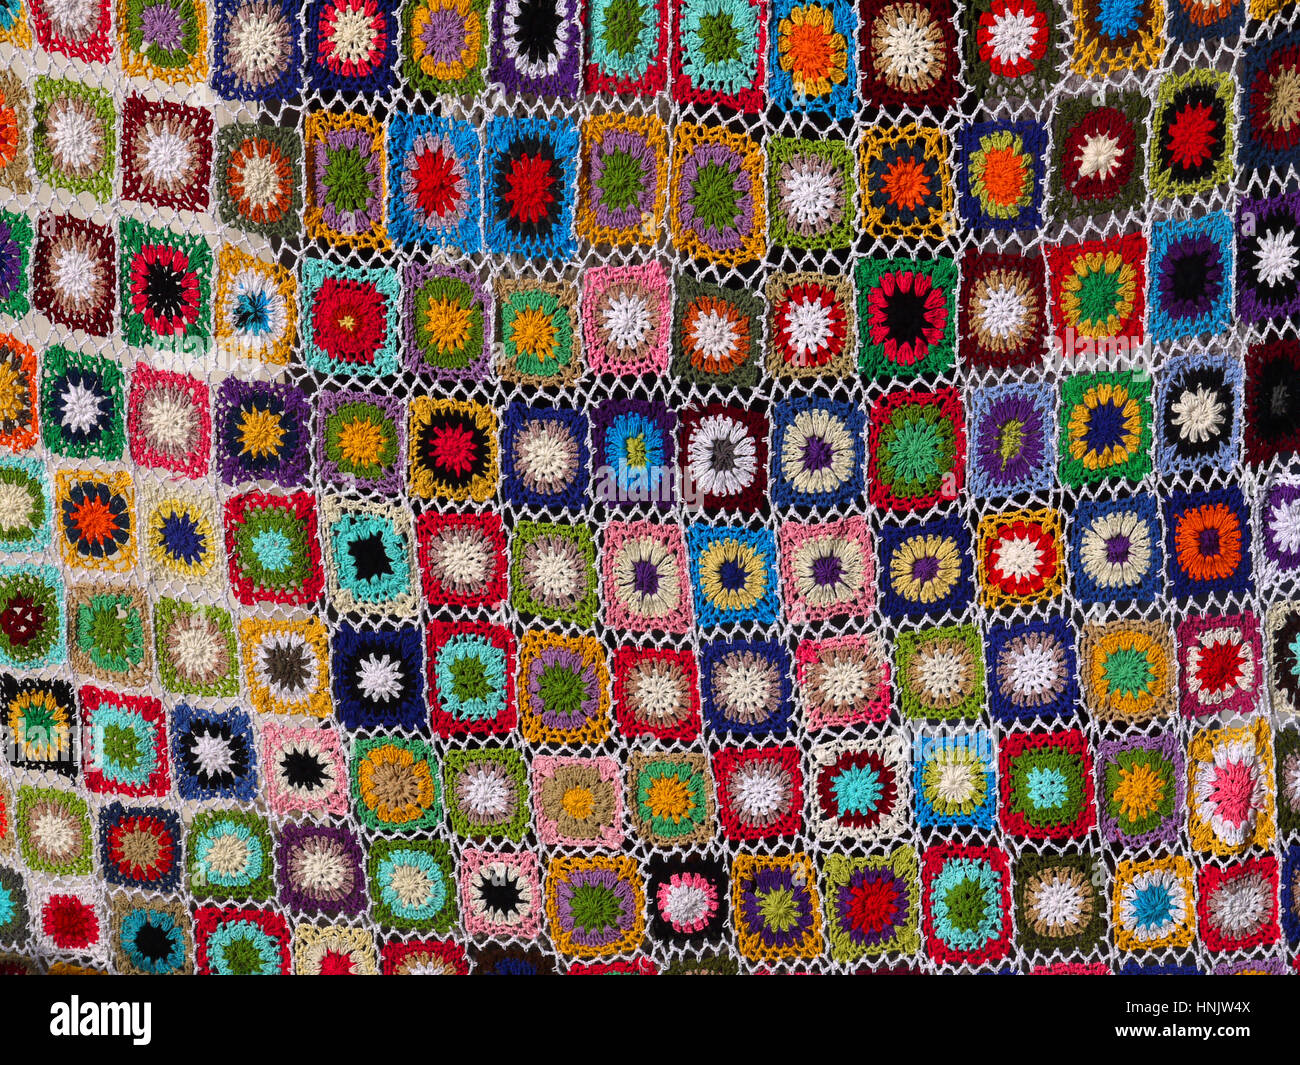 Colorful crocheted bedspread, Indonesia Stock Photo